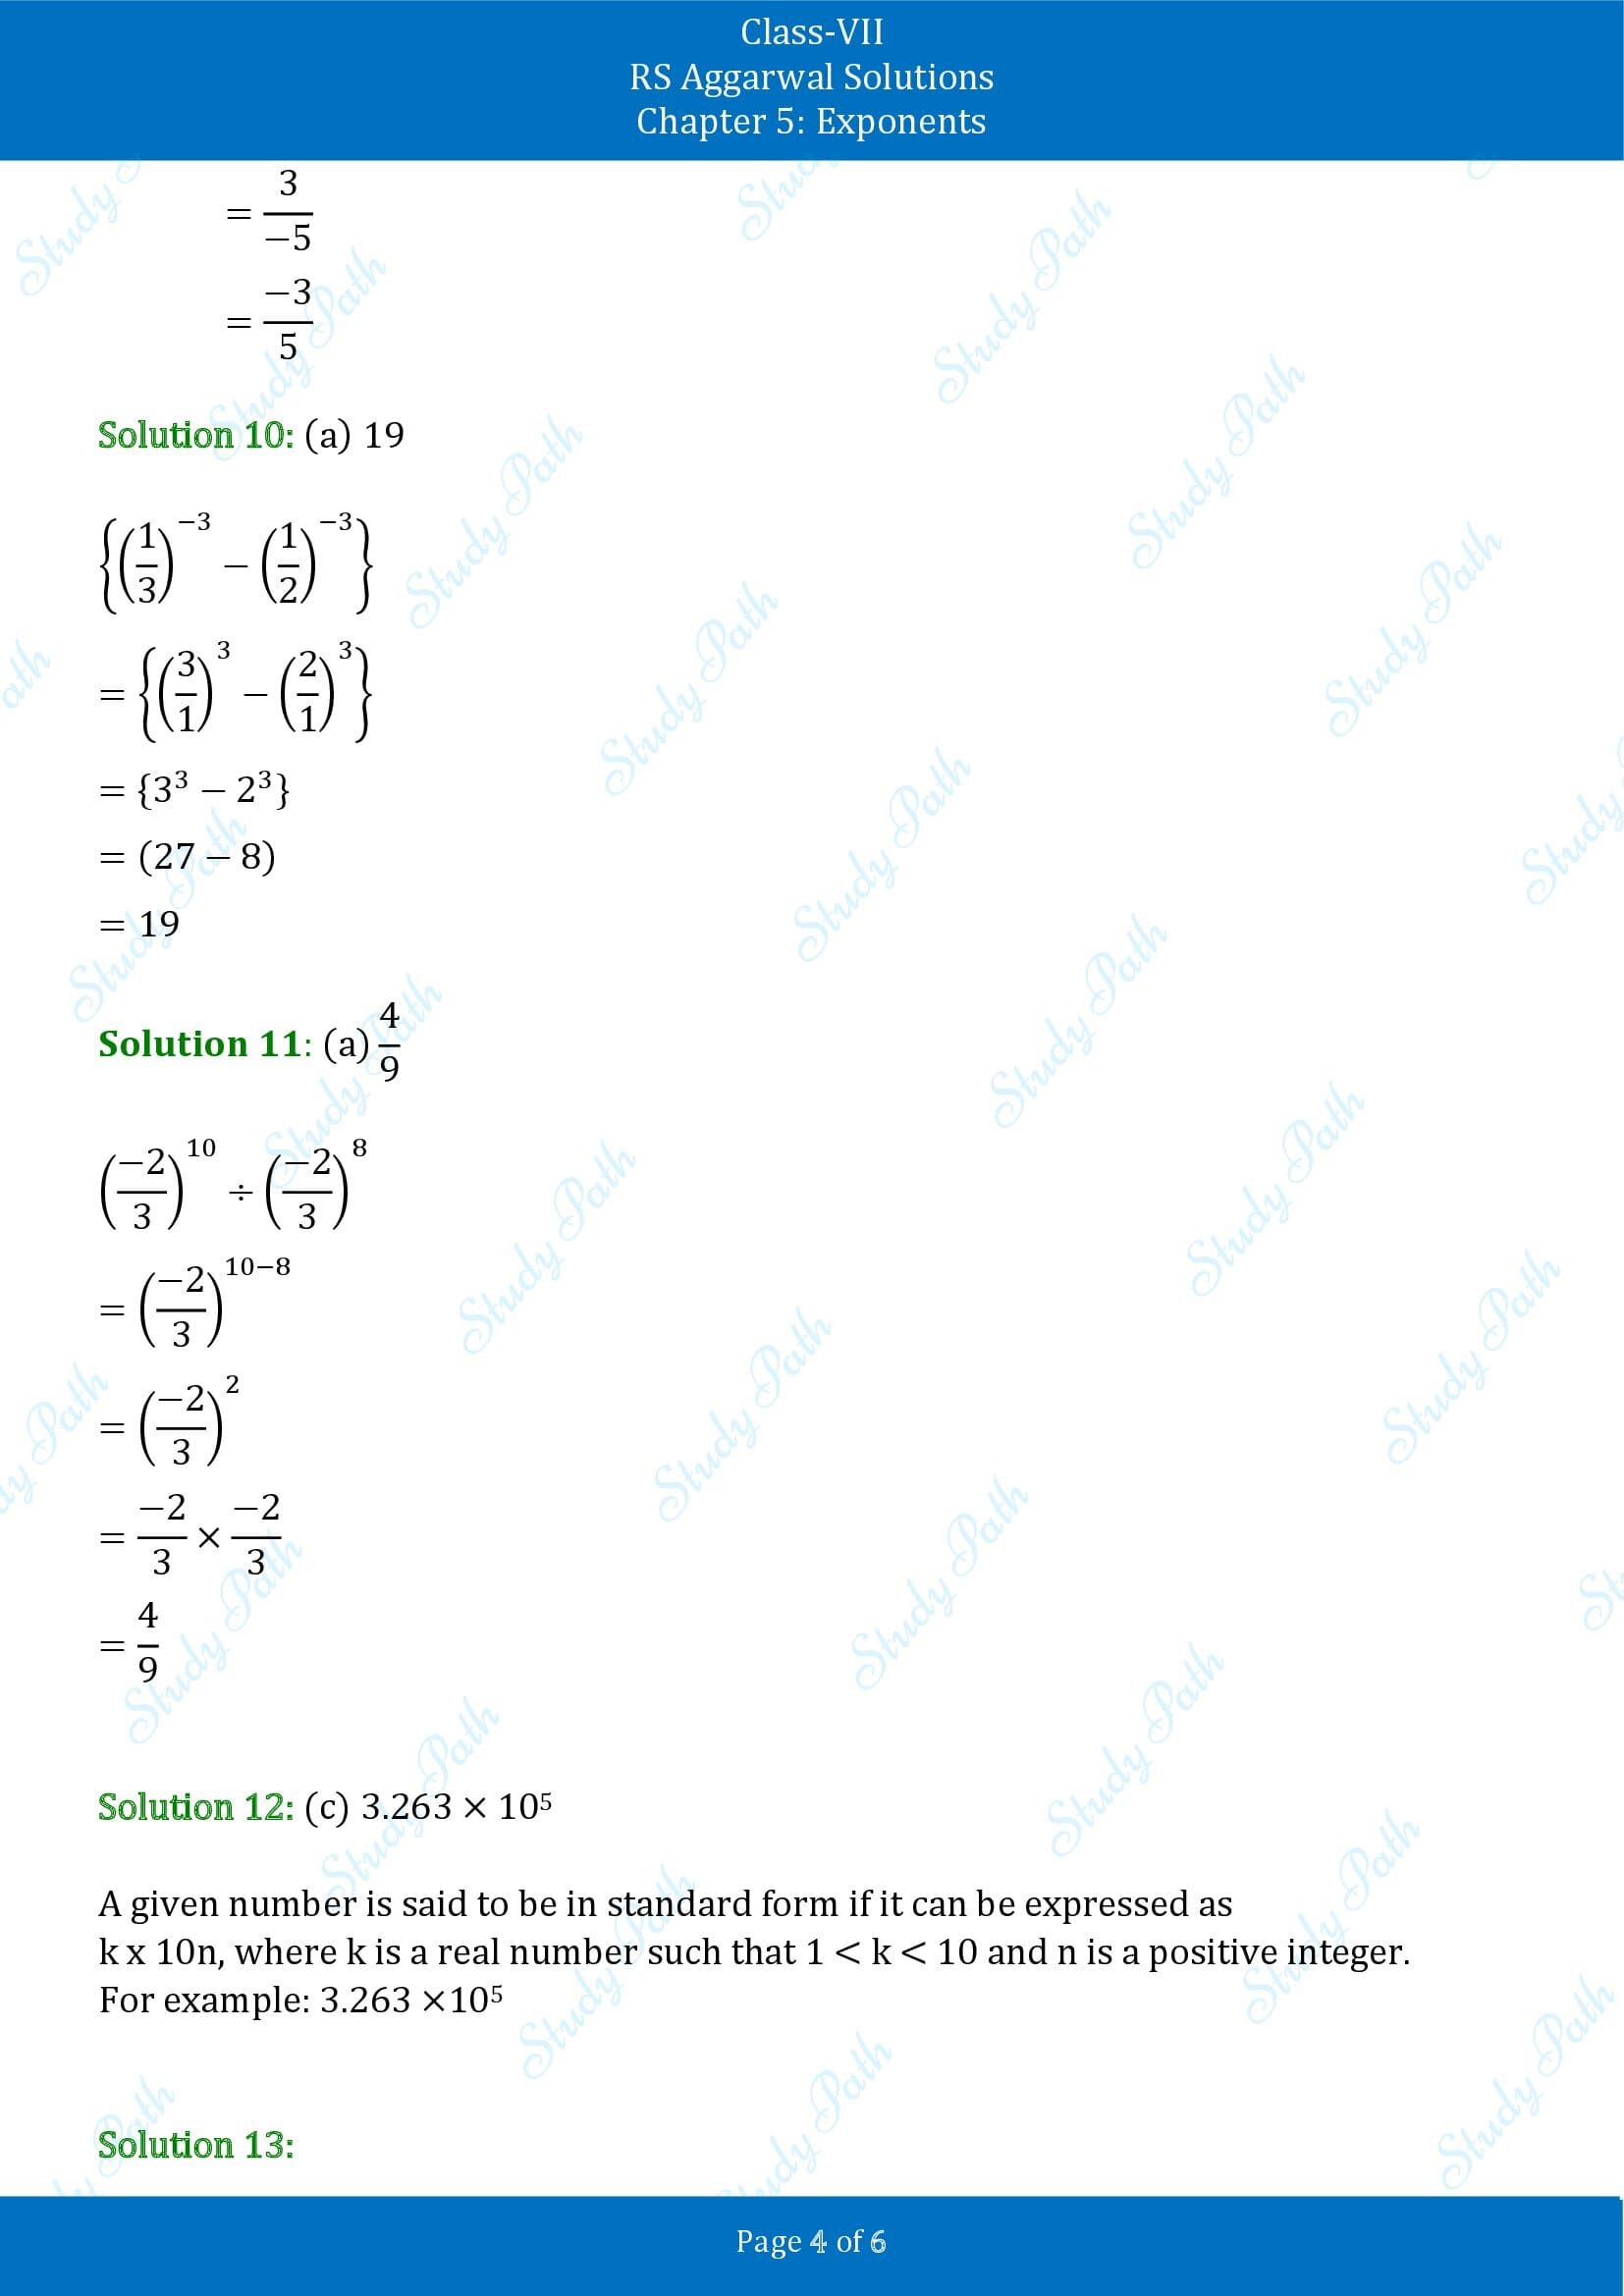 RS Aggarwal Solutions Class 7 Chapter 5 Exponents Test Paper 00004